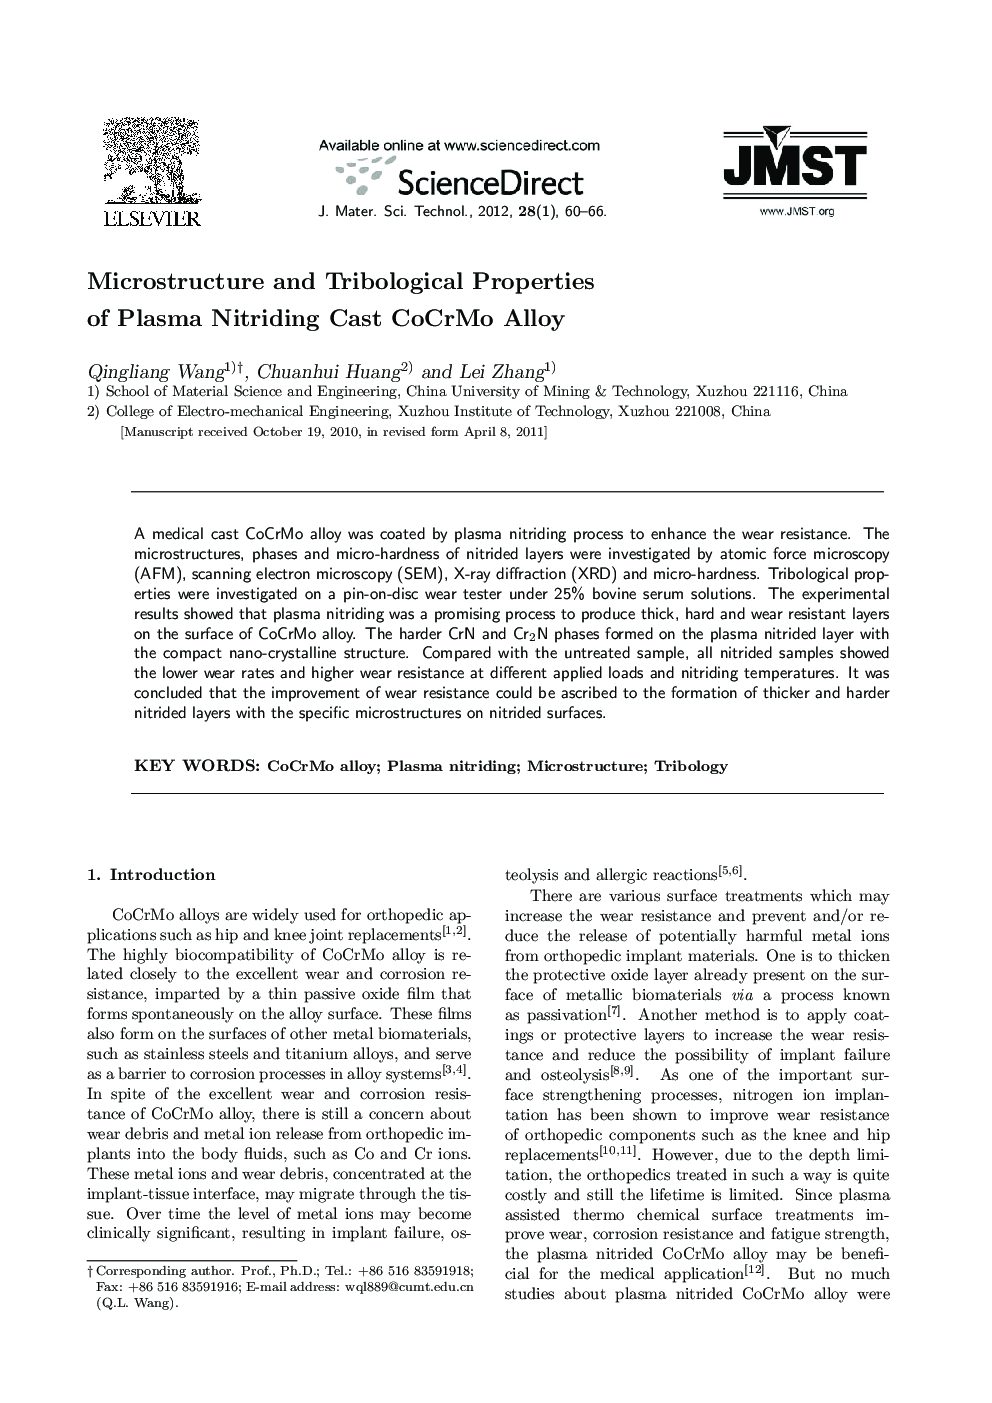 Microstructure and Tribological Properties of Plasma Nitriding Cast CoCrMo Alloy